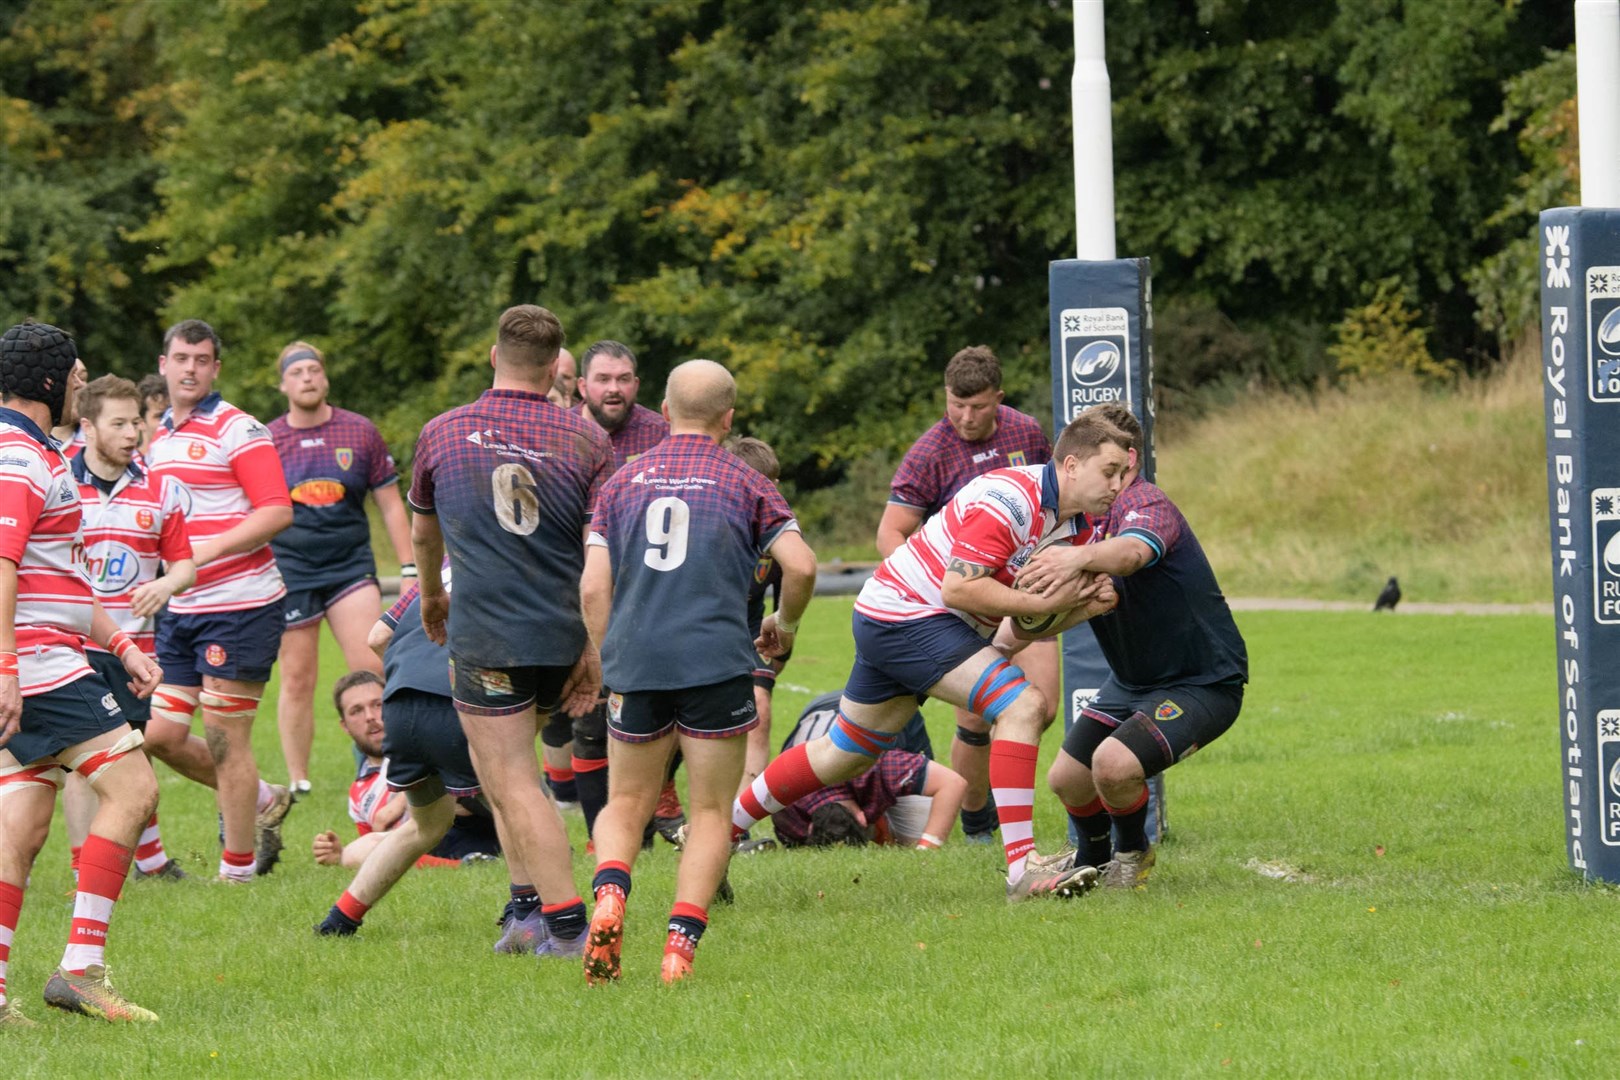 Andrew McBean breaks last tackle on way to score. Picture: Colin Little